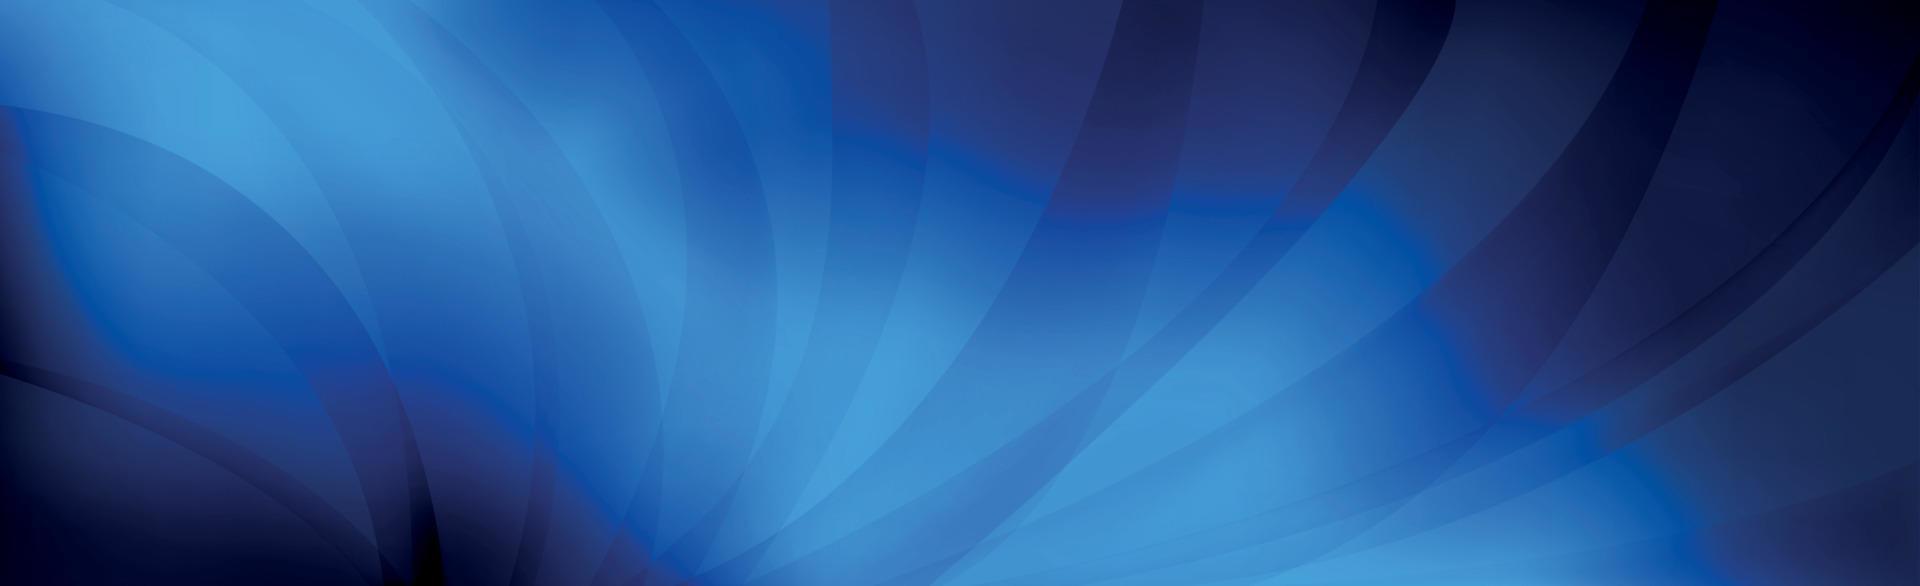 Panoramic abstract web background blue purple gradient - Vector